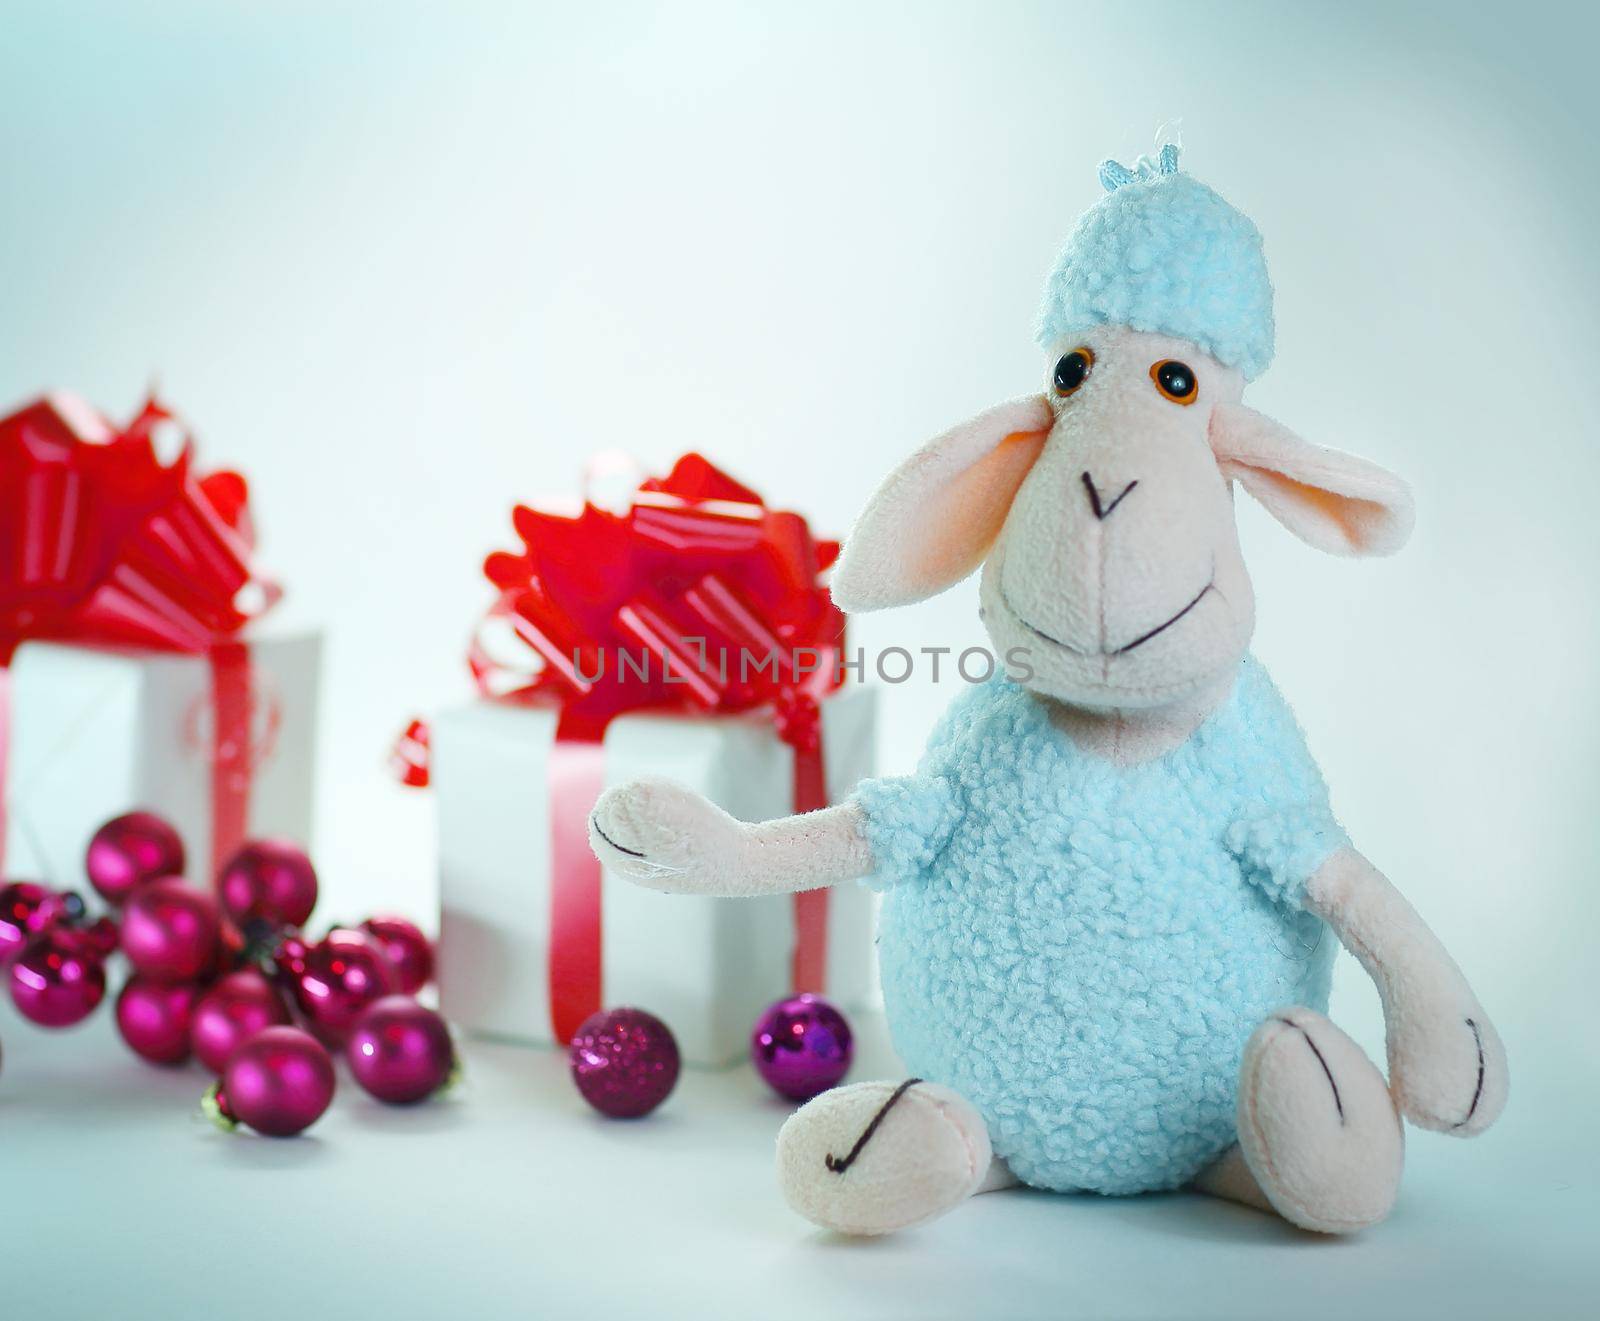 Christmas gifts and a toy sheep .isolated on white background.photo with copy space